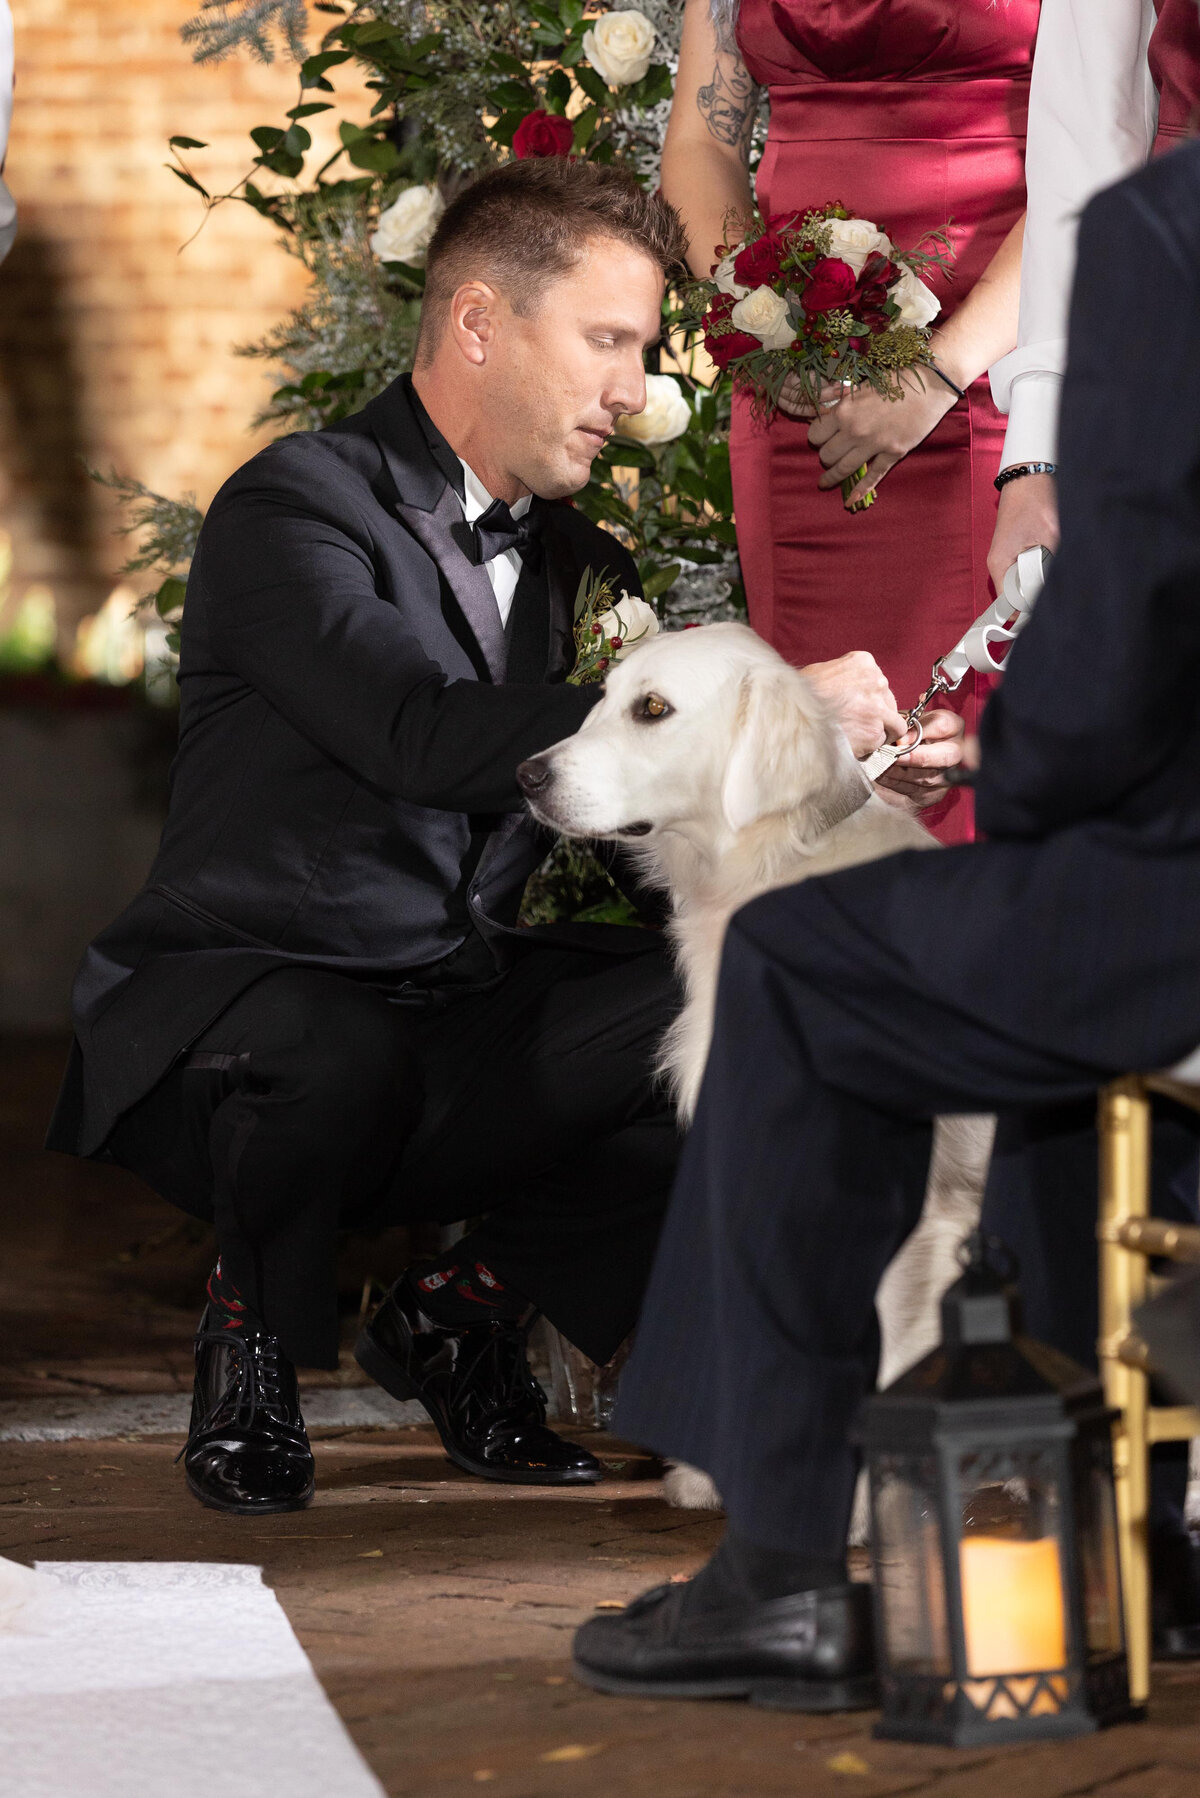 Chip takes the wedding ring for his bride from his dog, the ring bearer at his wedding.